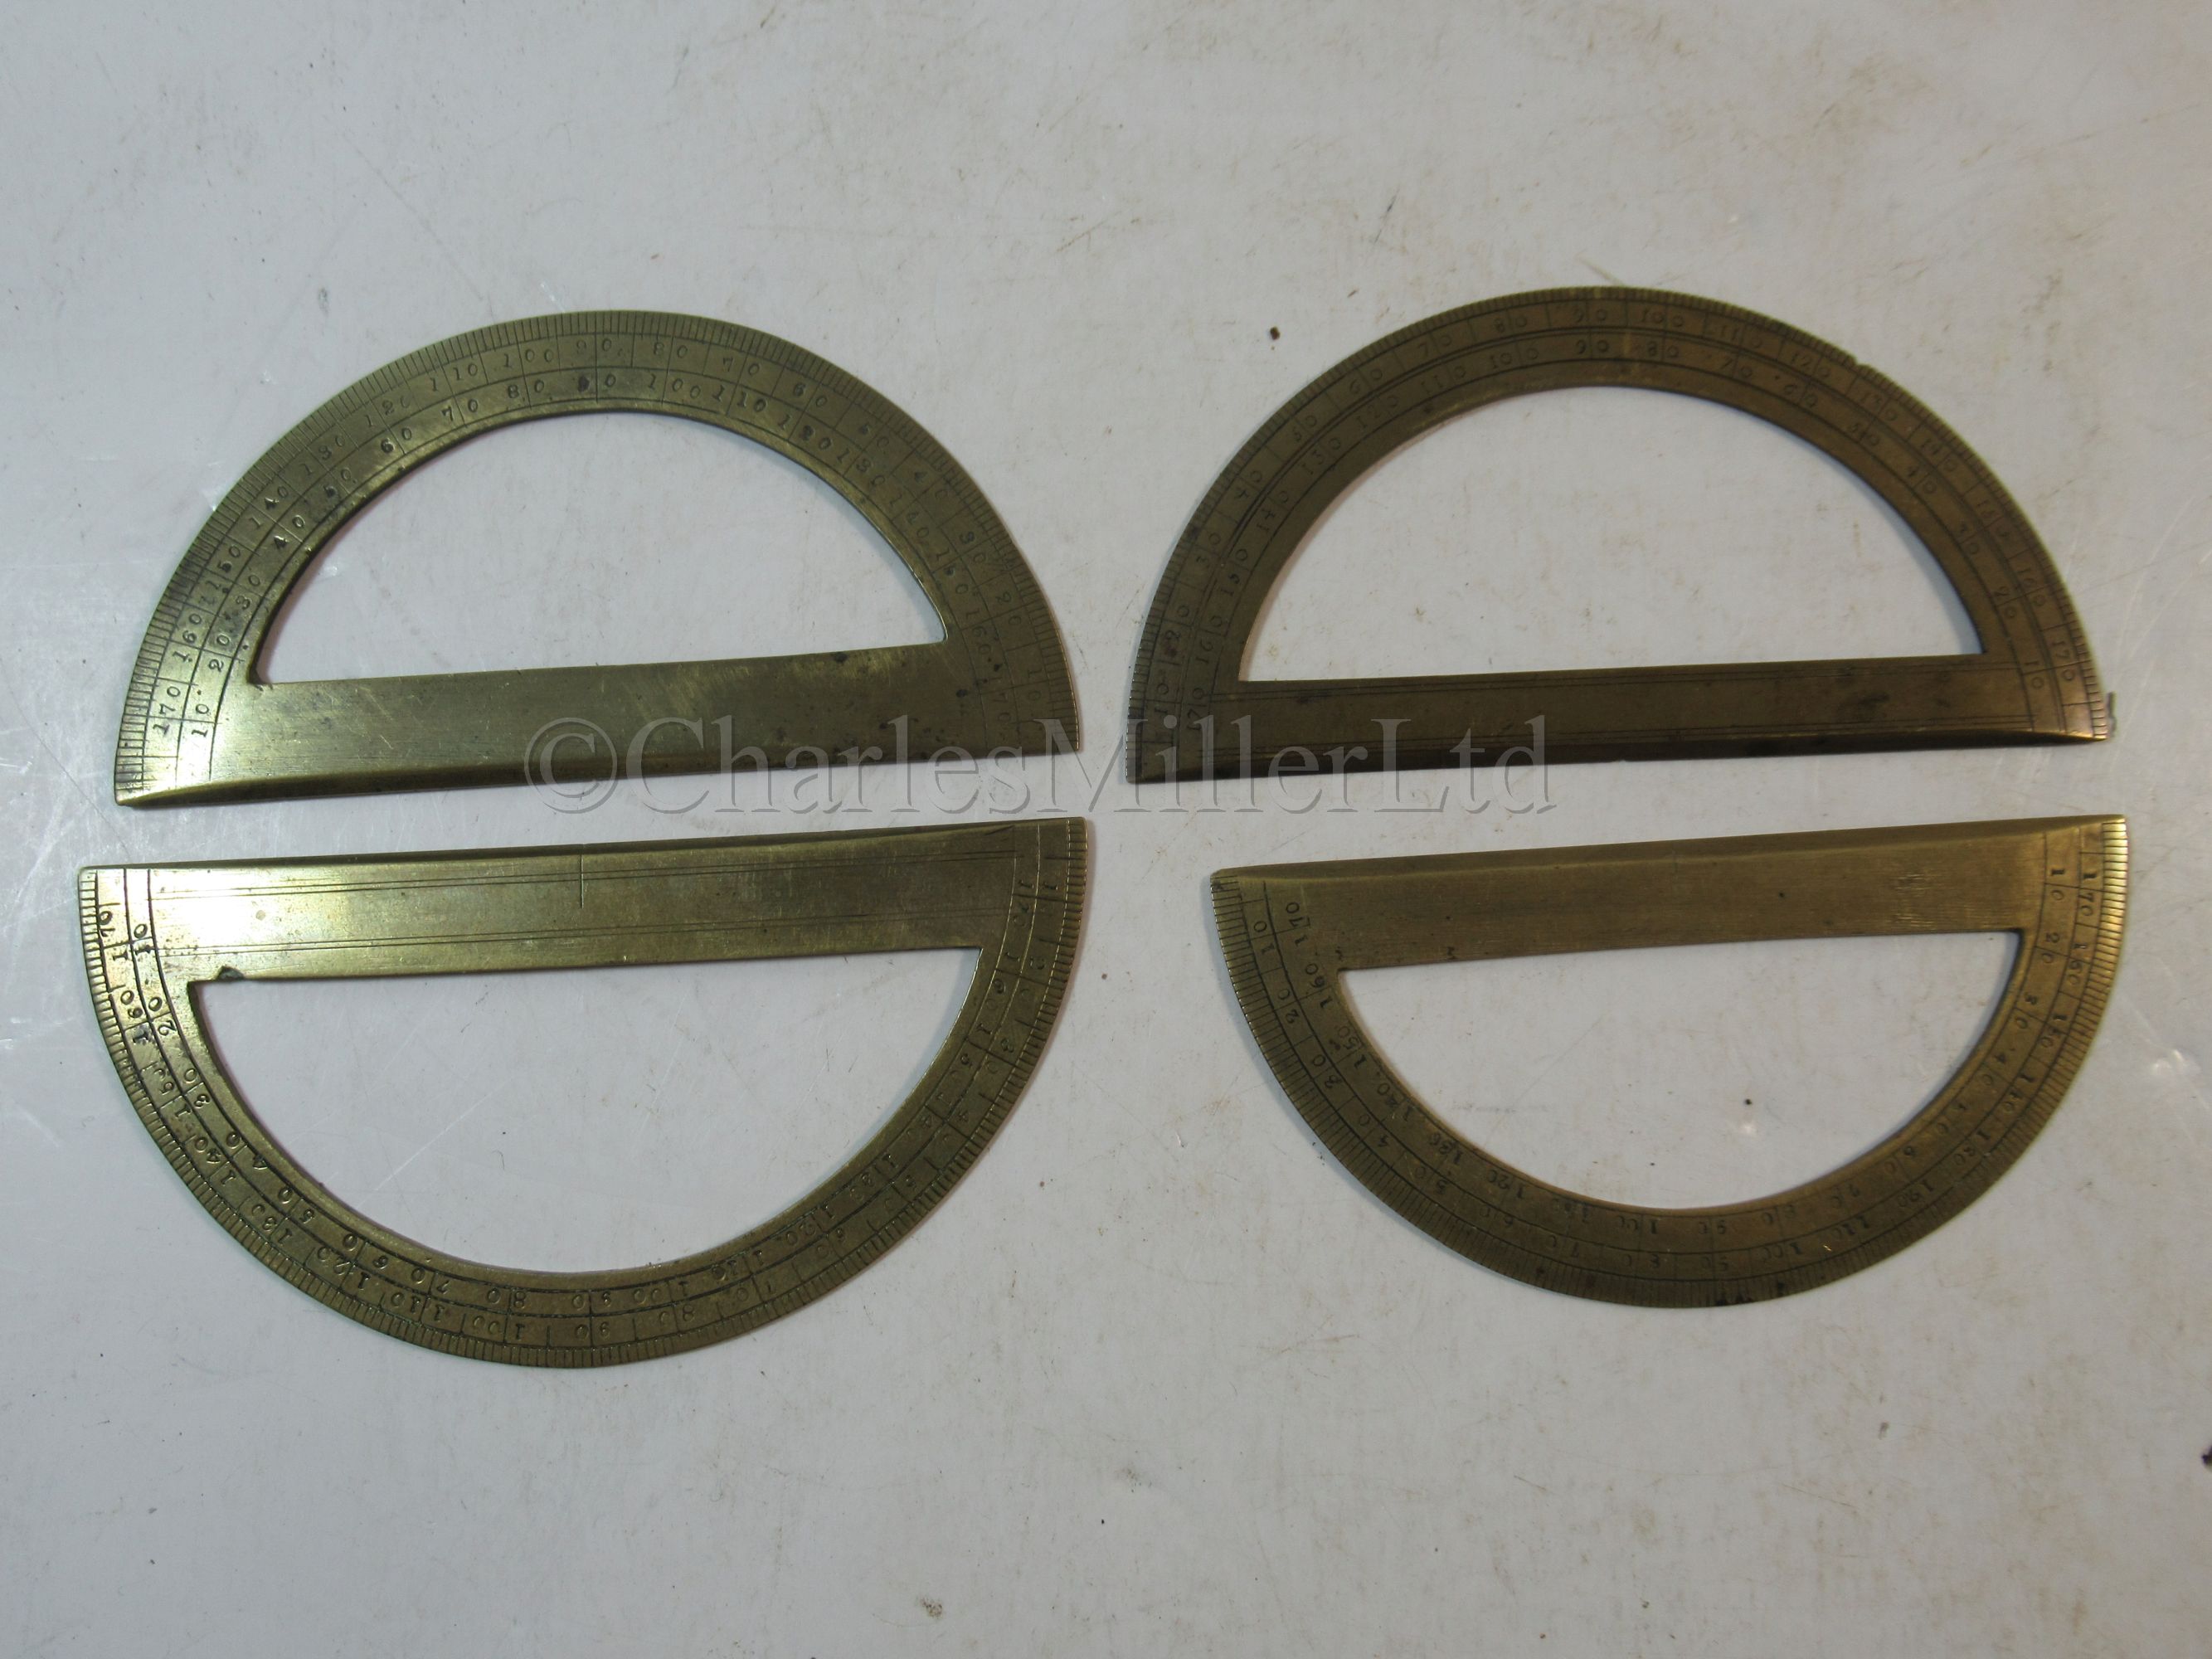 Ø A FOLDING IVORY AND BRASS SECTOR BY ADAMS, LONDON, CIRCA 1790 & 4 protractors - Image 7 of 9